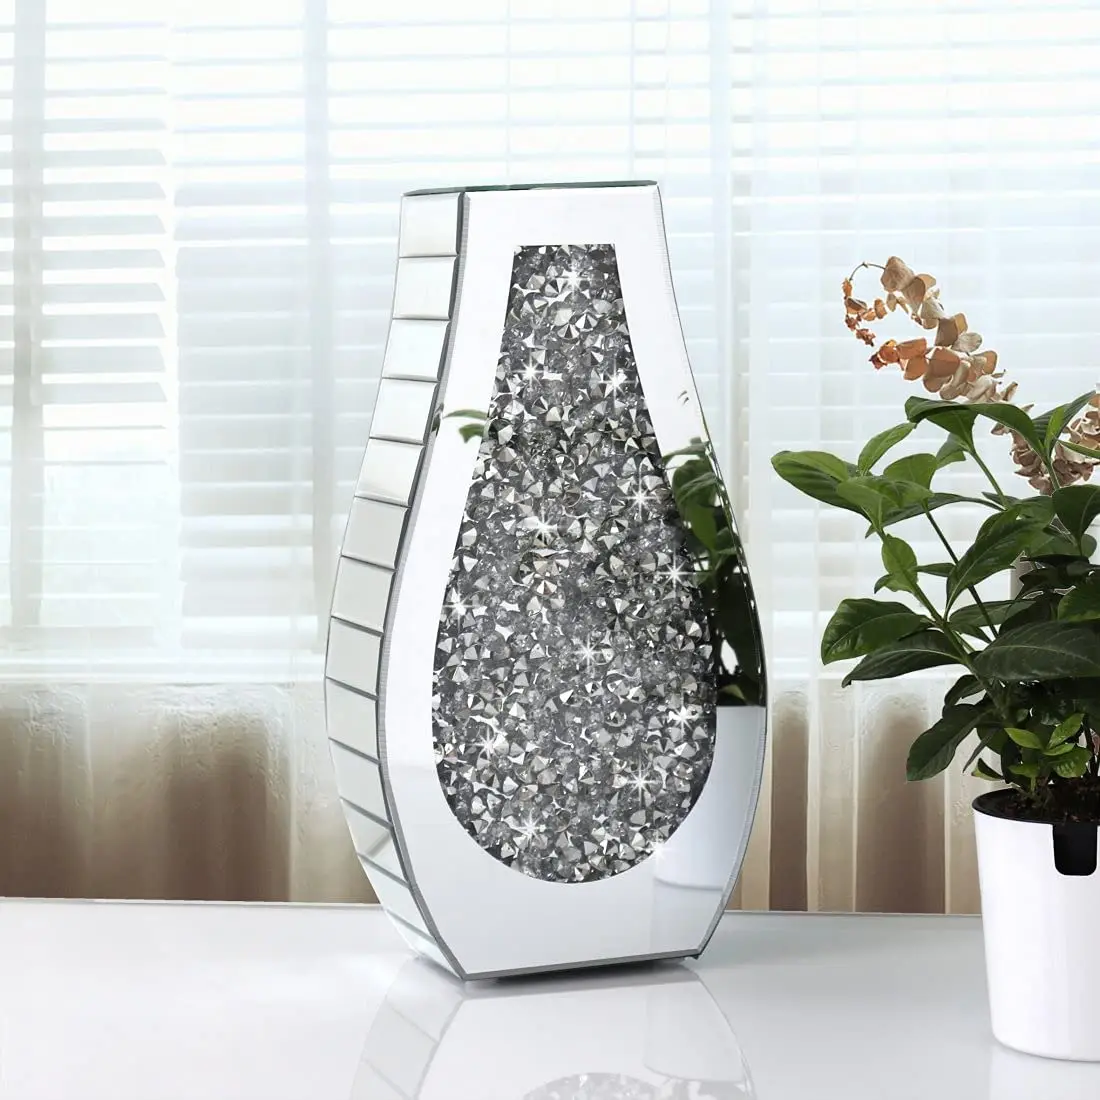 Arc-Shaped Thickened Large Size Luxury Crystal Silver Glass Decorative Crushed Diamond Mirrored Flower Vase For Home Decor